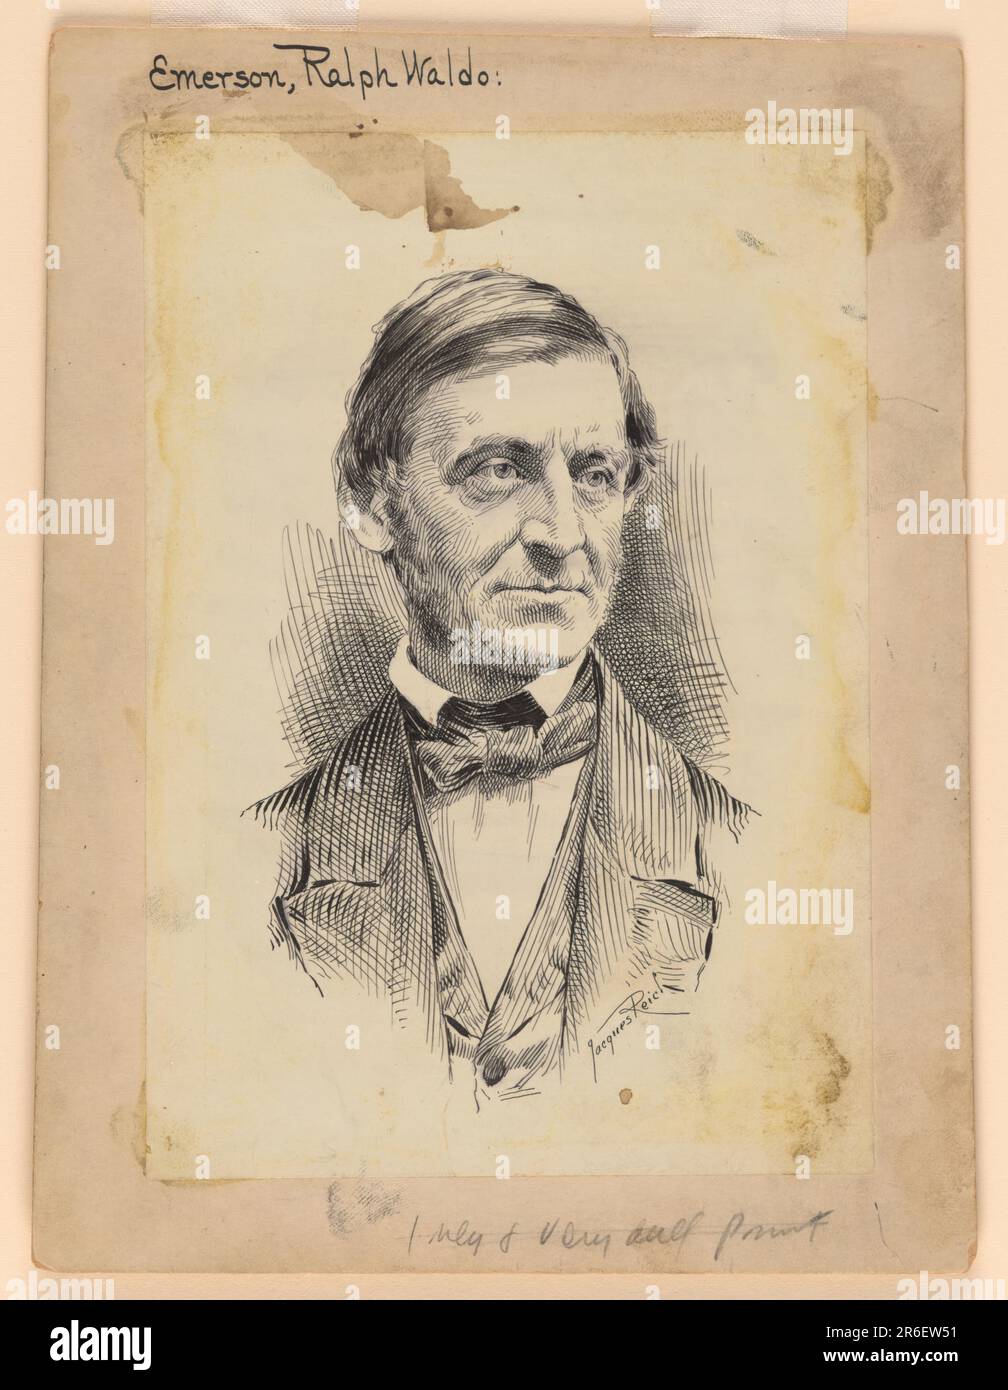 Ralph Waldo Emerson. ink on paper. Date: late 19th-early 20th century. Museum: NATIONAL PORTRAIT GALLERY. Stock Photo